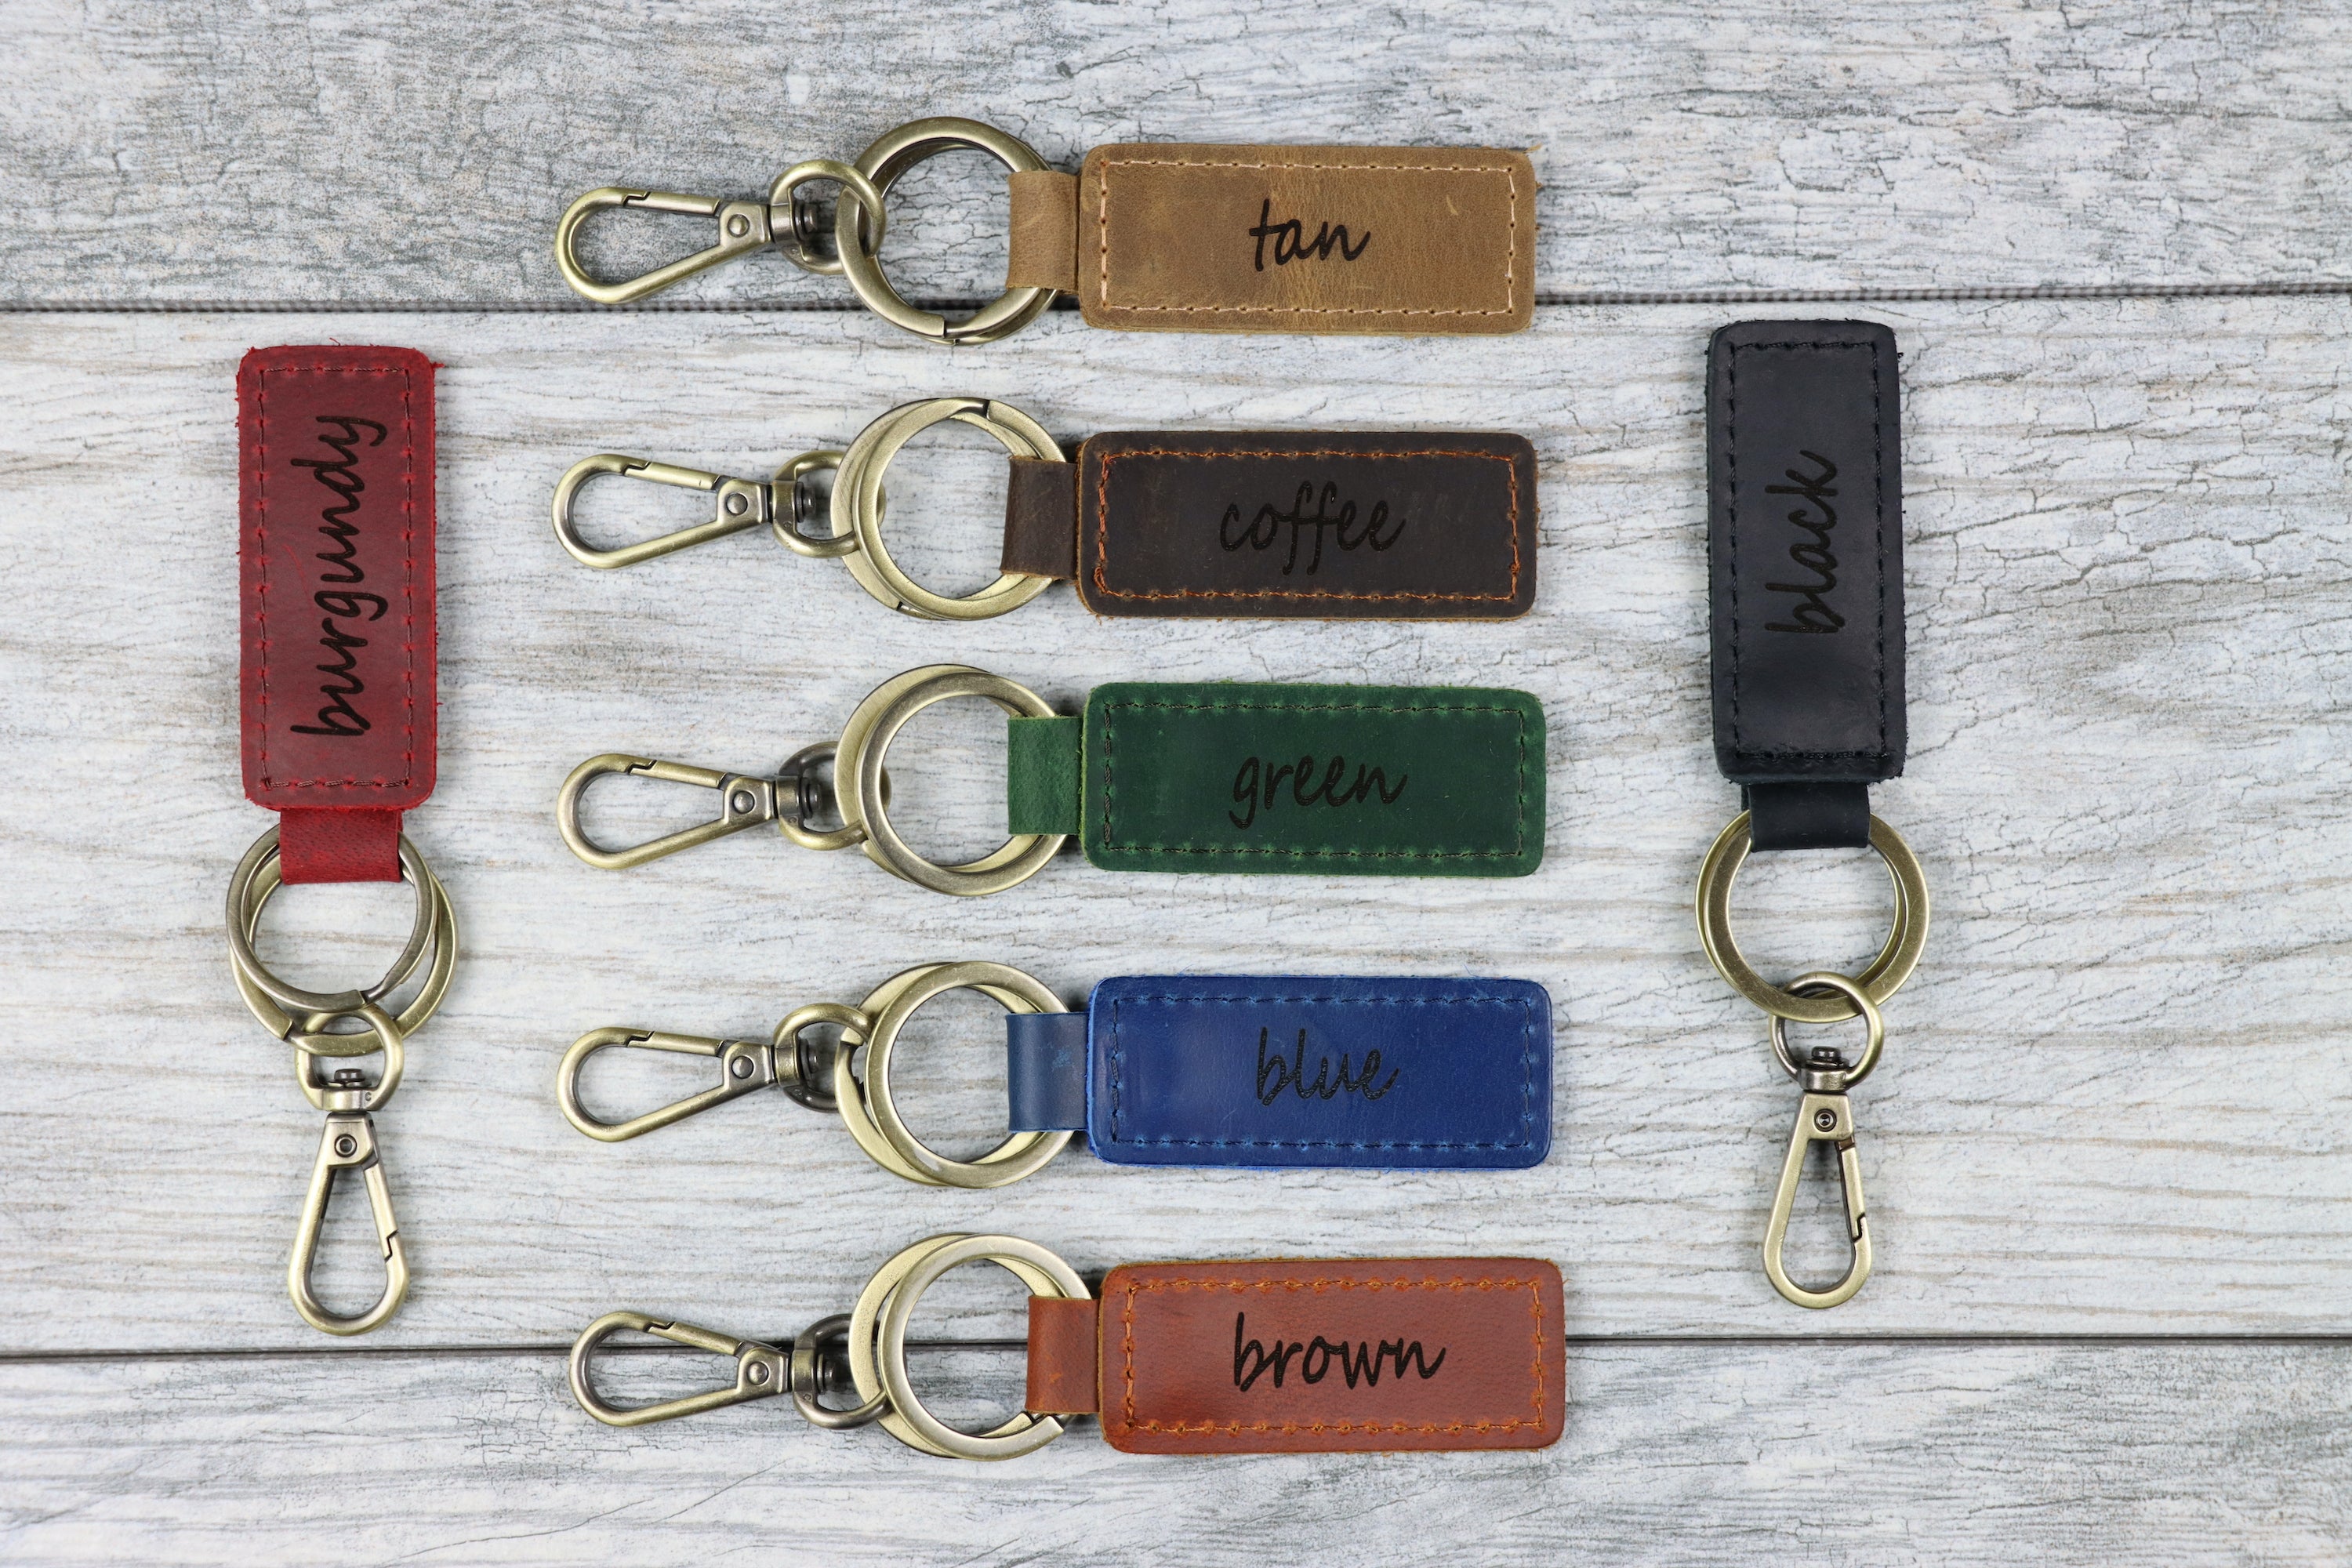 LucasGift 15-CUSTOMIZED Blank Leather Keychains Wholesale - Keychains in Bulk Burgundy / Pack of 15-CUSTOMIZED